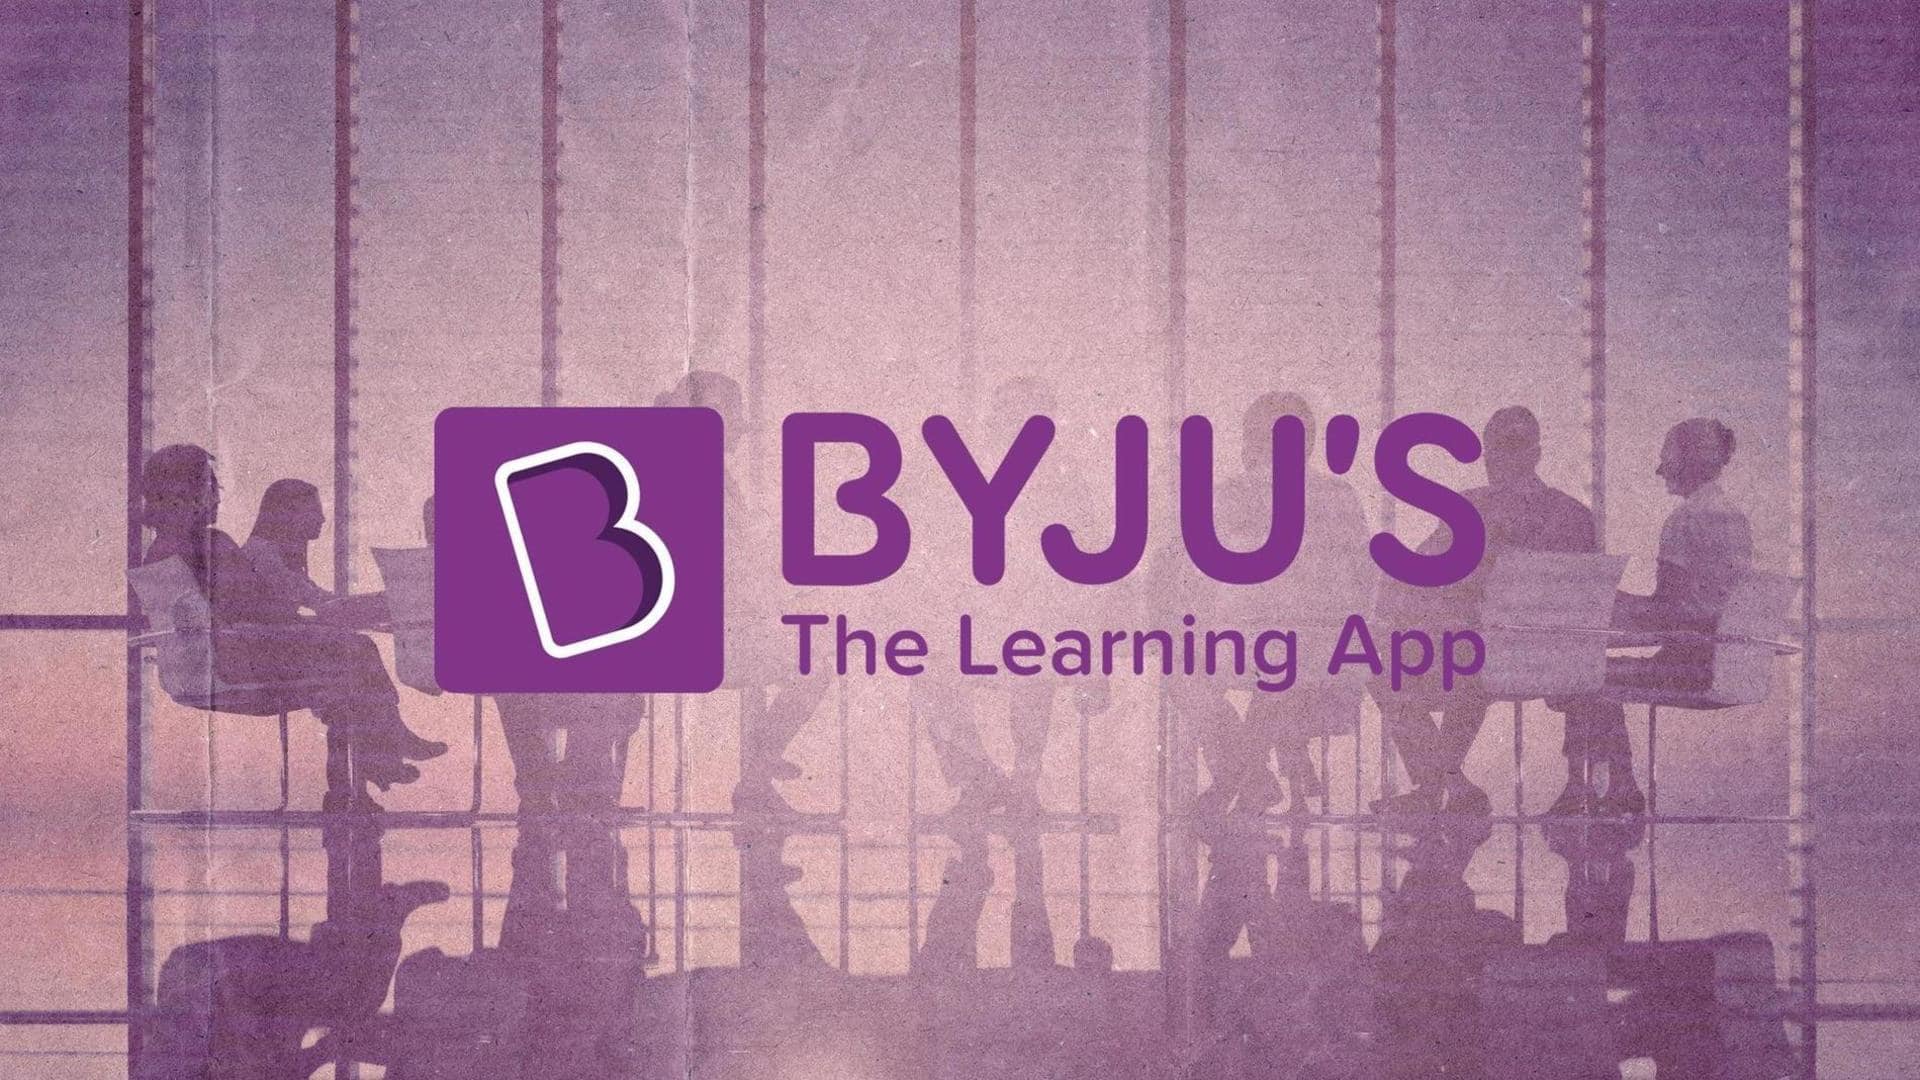 BYJU'S in turmoil: Delayed PF, shareholder criticism, more offices shut